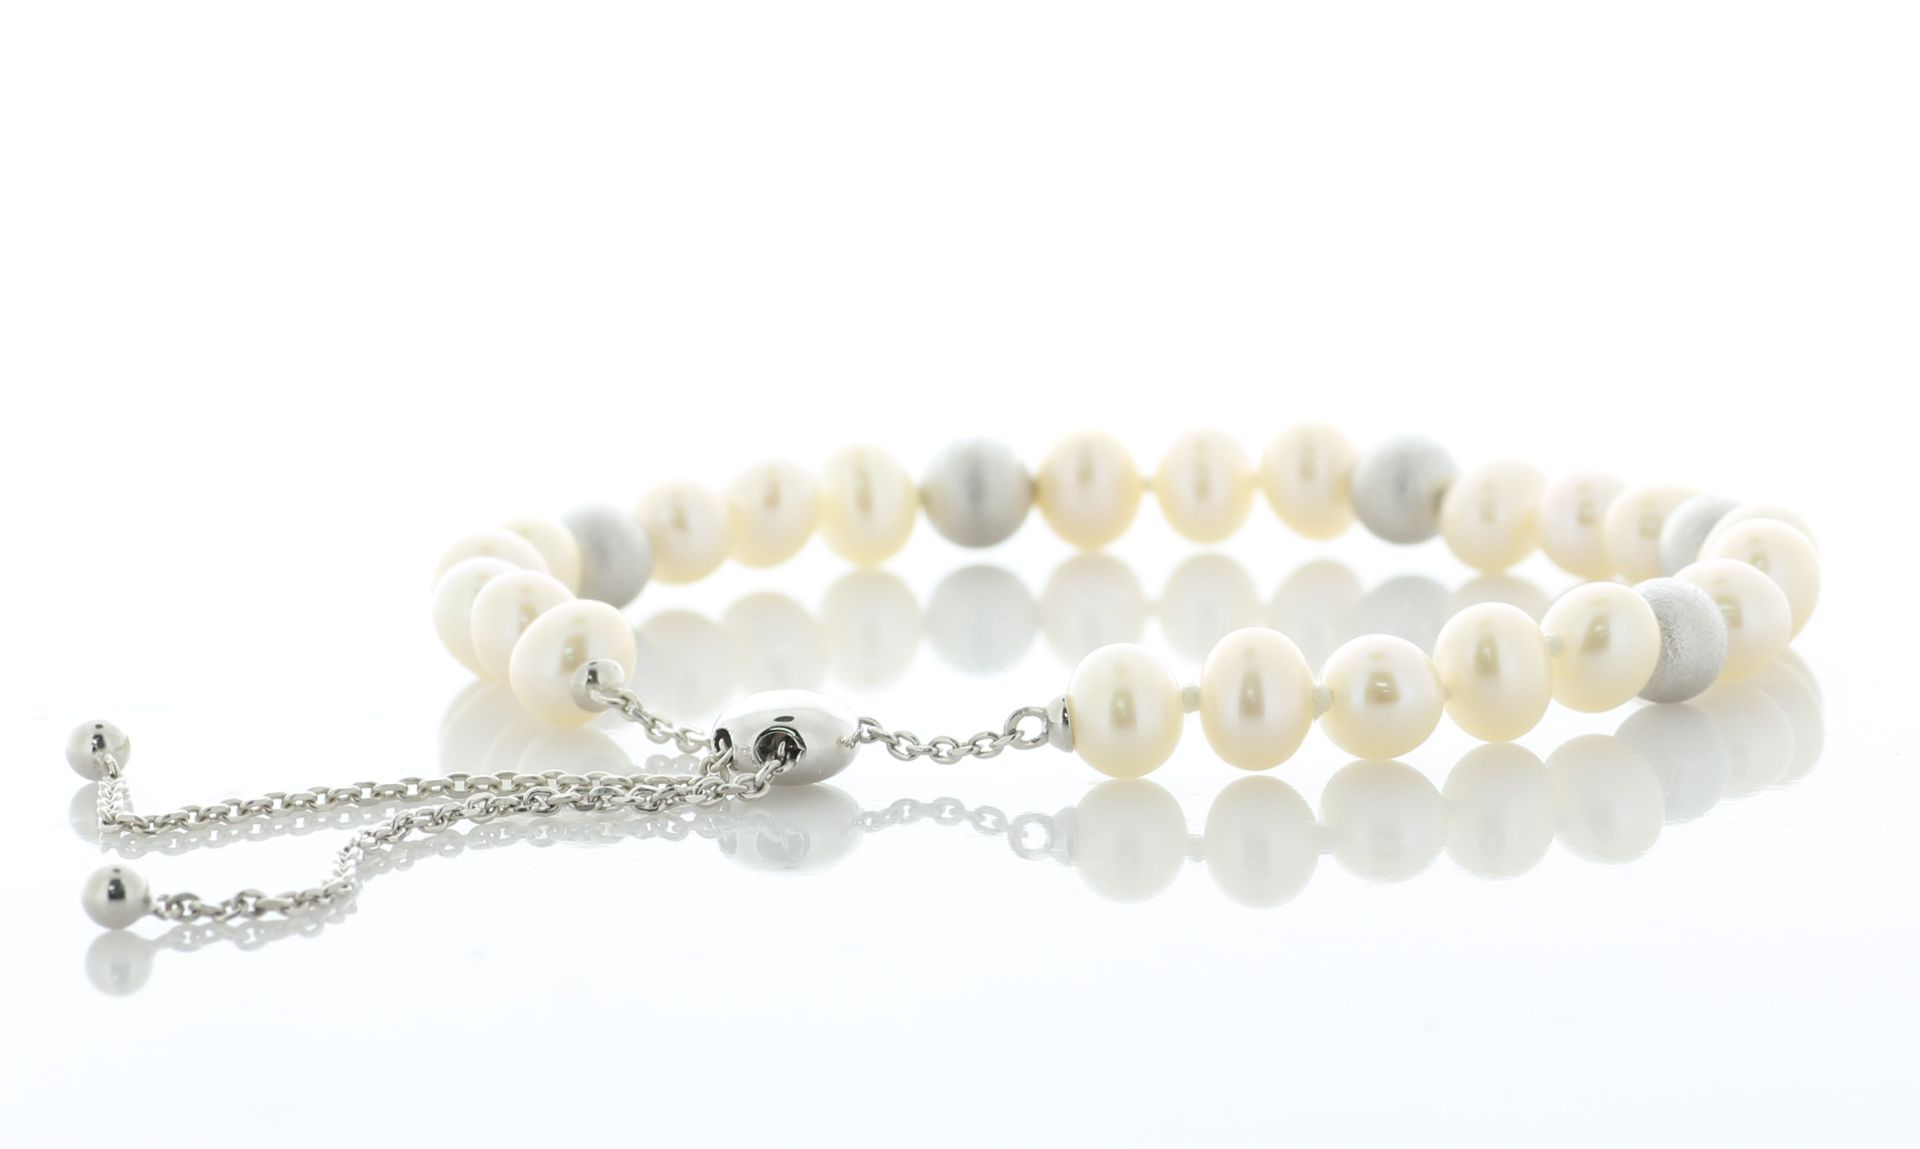 Freshwater Cultured 5.5 - 6.0mm Pearl Bracelet With Silver Clasp And Fastening - Valued By AGI £ - Image 2 of 4